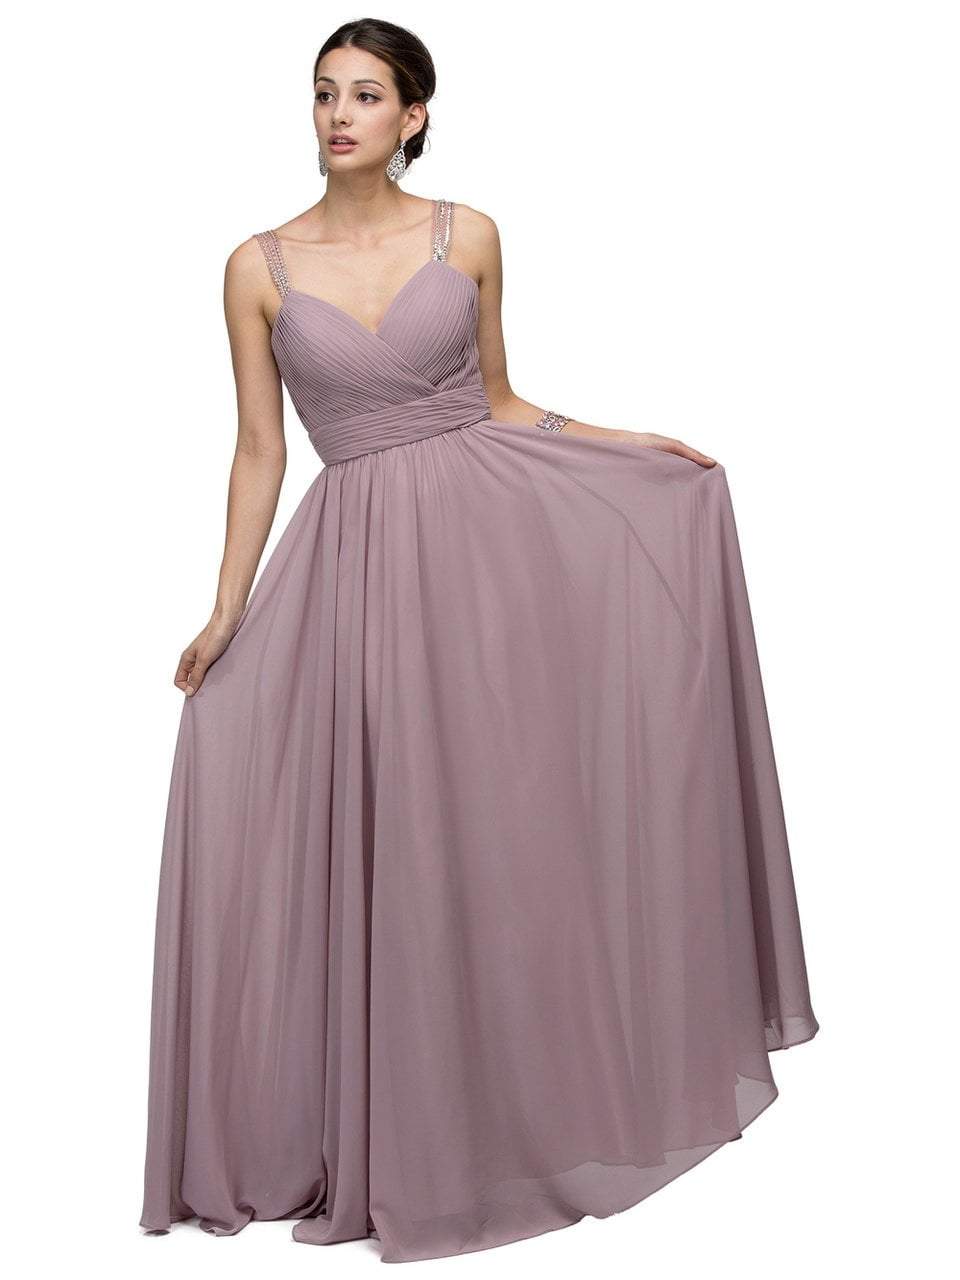 Image of Dancing Queen Bridal - 9471 Romantic Jewel-accented Ruched V-neck Ball Gown